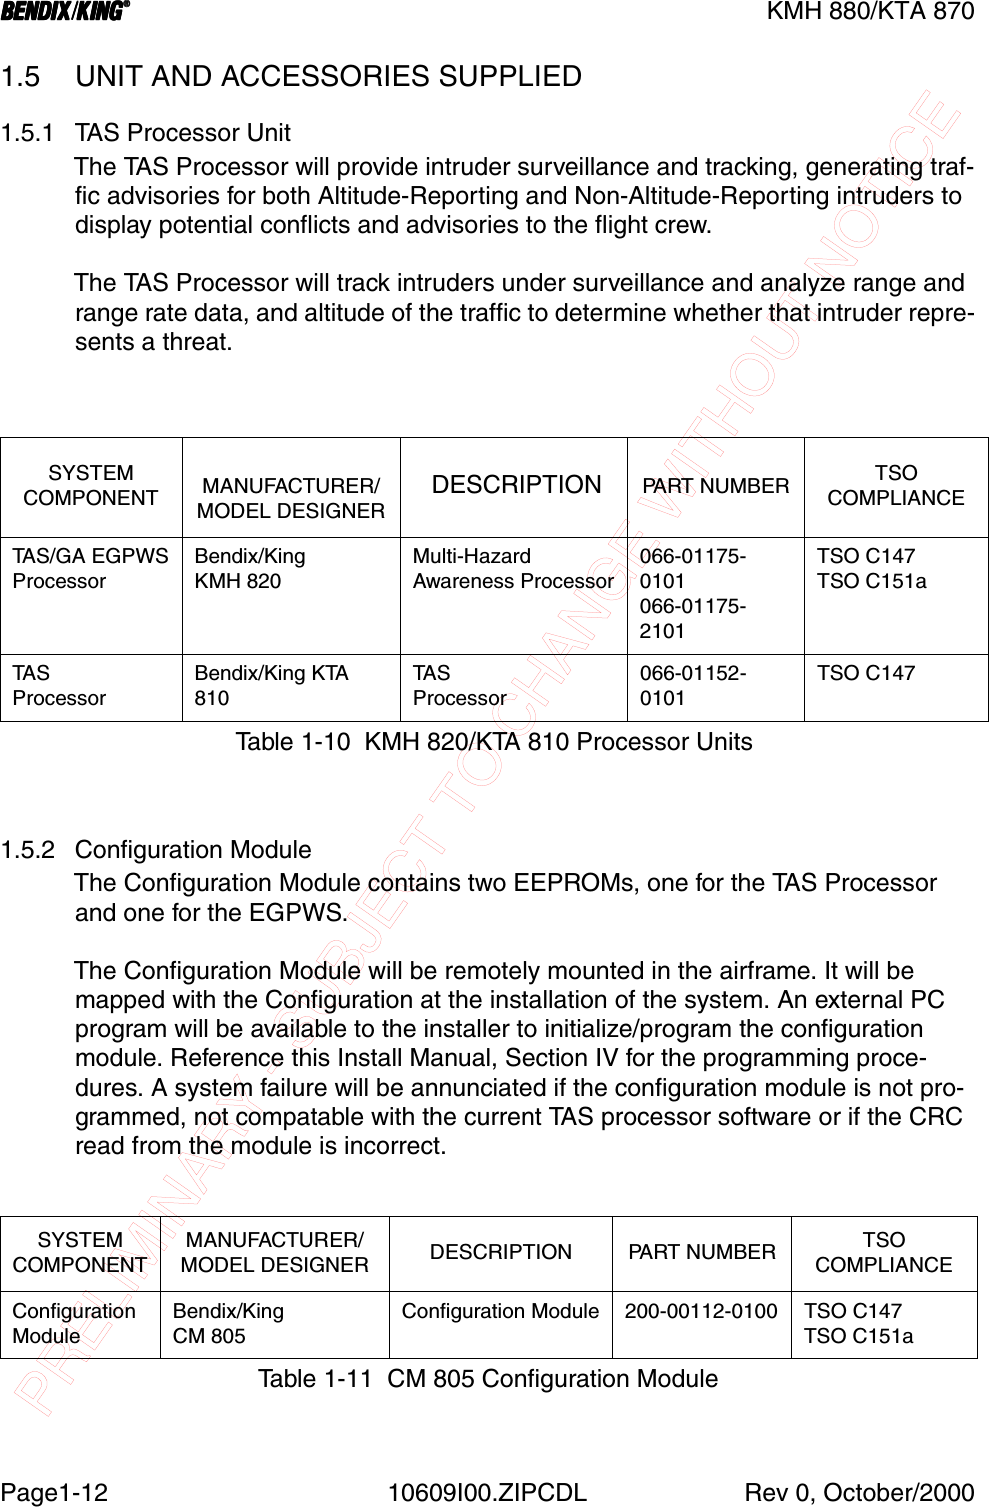 PRELIMINARY - SUBJECT TO CHANGE WITHOUT NOTICEBBBBKMH 880/KTA 870Page1-12 10609I00.ZIPCDL Rev 0, October/20001.5 UNIT AND ACCESSORIES SUPPLIED1.5.1 TAS Processor UnitThe TAS Processor will provide intruder surveillance and tracking, generating traf-fic advisories for both Altitude-Reporting and Non-Altitude-Reporting intruders to display potential conflicts and advisories to the flight crew.The TAS Processor will track intruders under surveillance and analyze range and range rate data, and altitude of the traffic to determine whether that intruder repre-sents a threat.1.5.2 Configuration ModuleThe Configuration Module contains two EEPROMs, one for the TAS Processor and one for the EGPWS.The Configuration Module will be remotely mounted in the airframe. It will be mapped with the Configuration at the installation of the system. An external PC program will be available to the installer to initialize/program the configuration module. Reference this Install Manual, Section IV for the programming proce-dures. A system failure will be annunciated if the configuration module is not pro-grammed, not compatable with the current TAS processor software or if the CRC read from the module is incorrect.SYSTEM COMPONENT MANUFACTURER/MODEL DESIGNER DESCRIPTION PA RT  N U M B E R TSO COMPLIANCETA S / G A  E G P W SProcessorBendix/KingKMH 820Multi-HazardAwareness Processor066-01175-0101066-01175-2101TSO C147TSO C151aTA S  ProcessorBendix/King KTA 810TA SProcessor066-01152-0101TSO C147Table 1-10  KMH 820/KTA 810 Processor UnitsSYSTEMCOMPONENTMANUFACTURER/MODEL DESIGNER DESCRIPTION PART NUMBER TSO COMPLIANCEConfiguration  ModuleBendix/KingCM 805Configuration Module 200-00112-0100 TSO C147TSO C151aTable 1-11  CM 805 Configuration Module